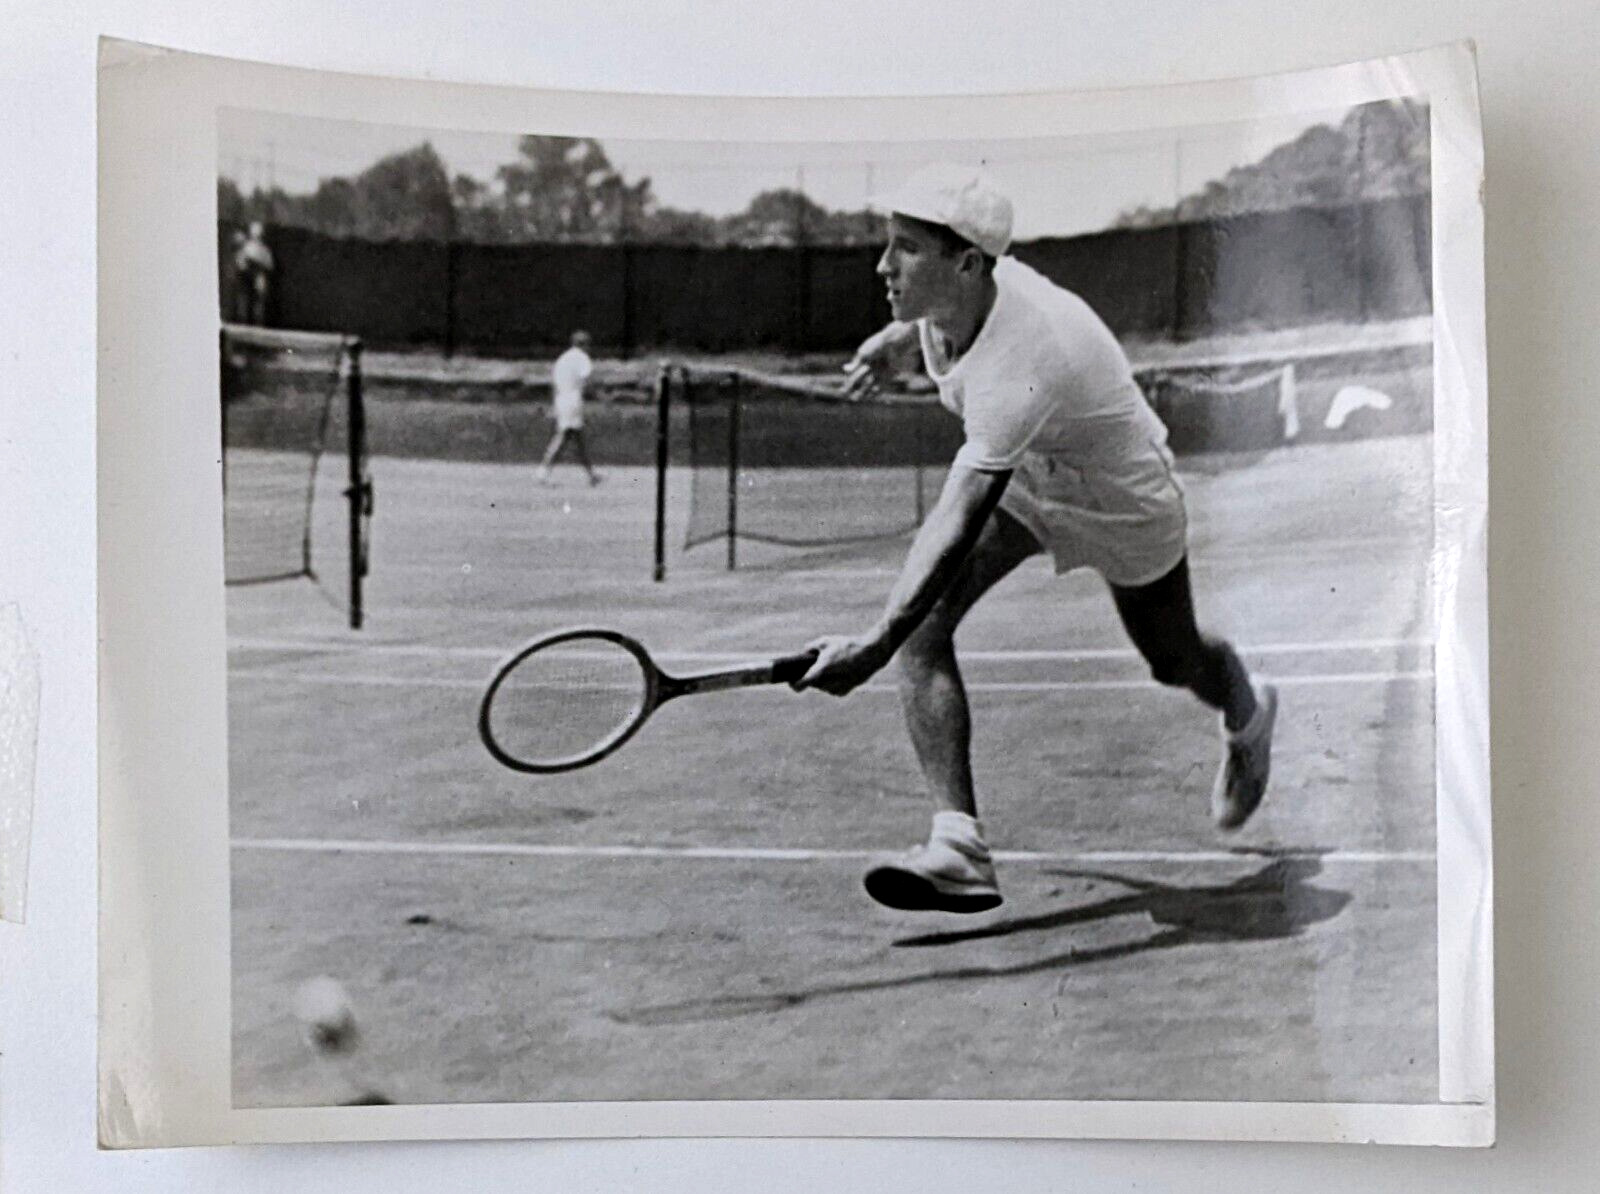 1950s Men\'s Tennis Match Lunging Forehand Vintage ACME Press Photo